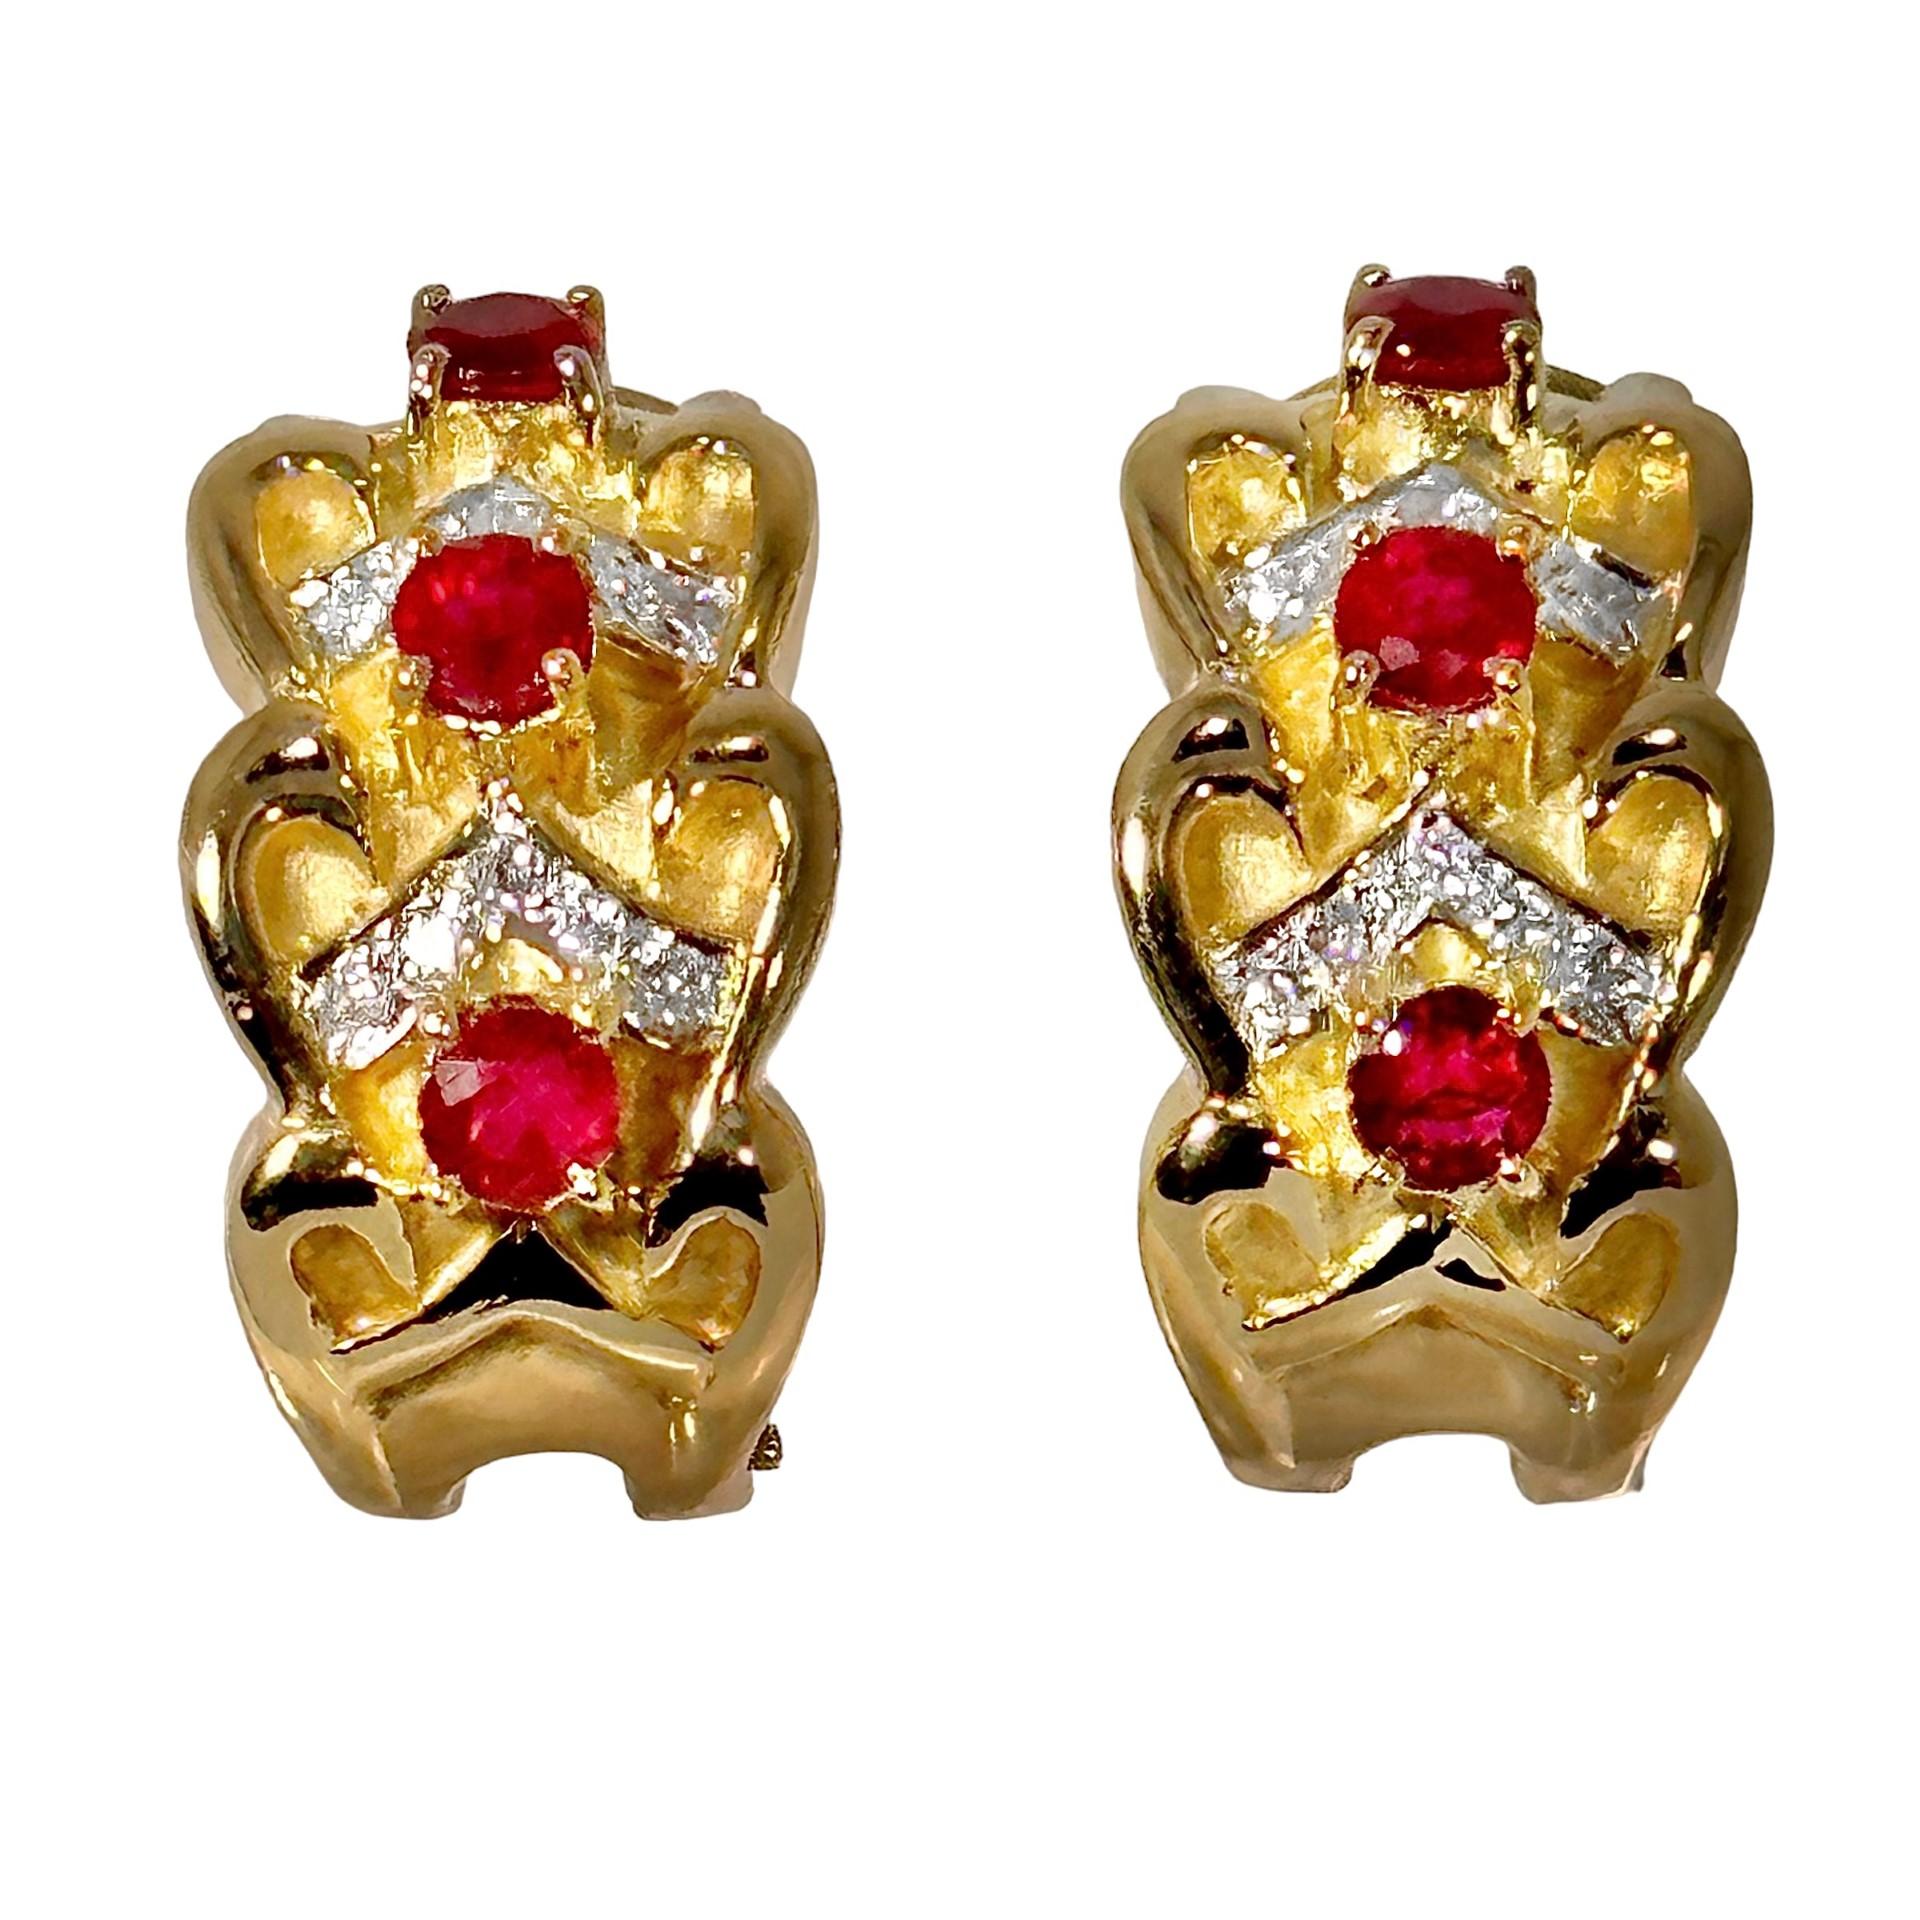 This very imaginative and well crafted pair of late-20th century 18k yellow gold hoop earrings are set with a total of six luxurious red rubies and twenty brilliant cut diamonds. Total approximate ruby weight is 1.00ct and total approximate diamond